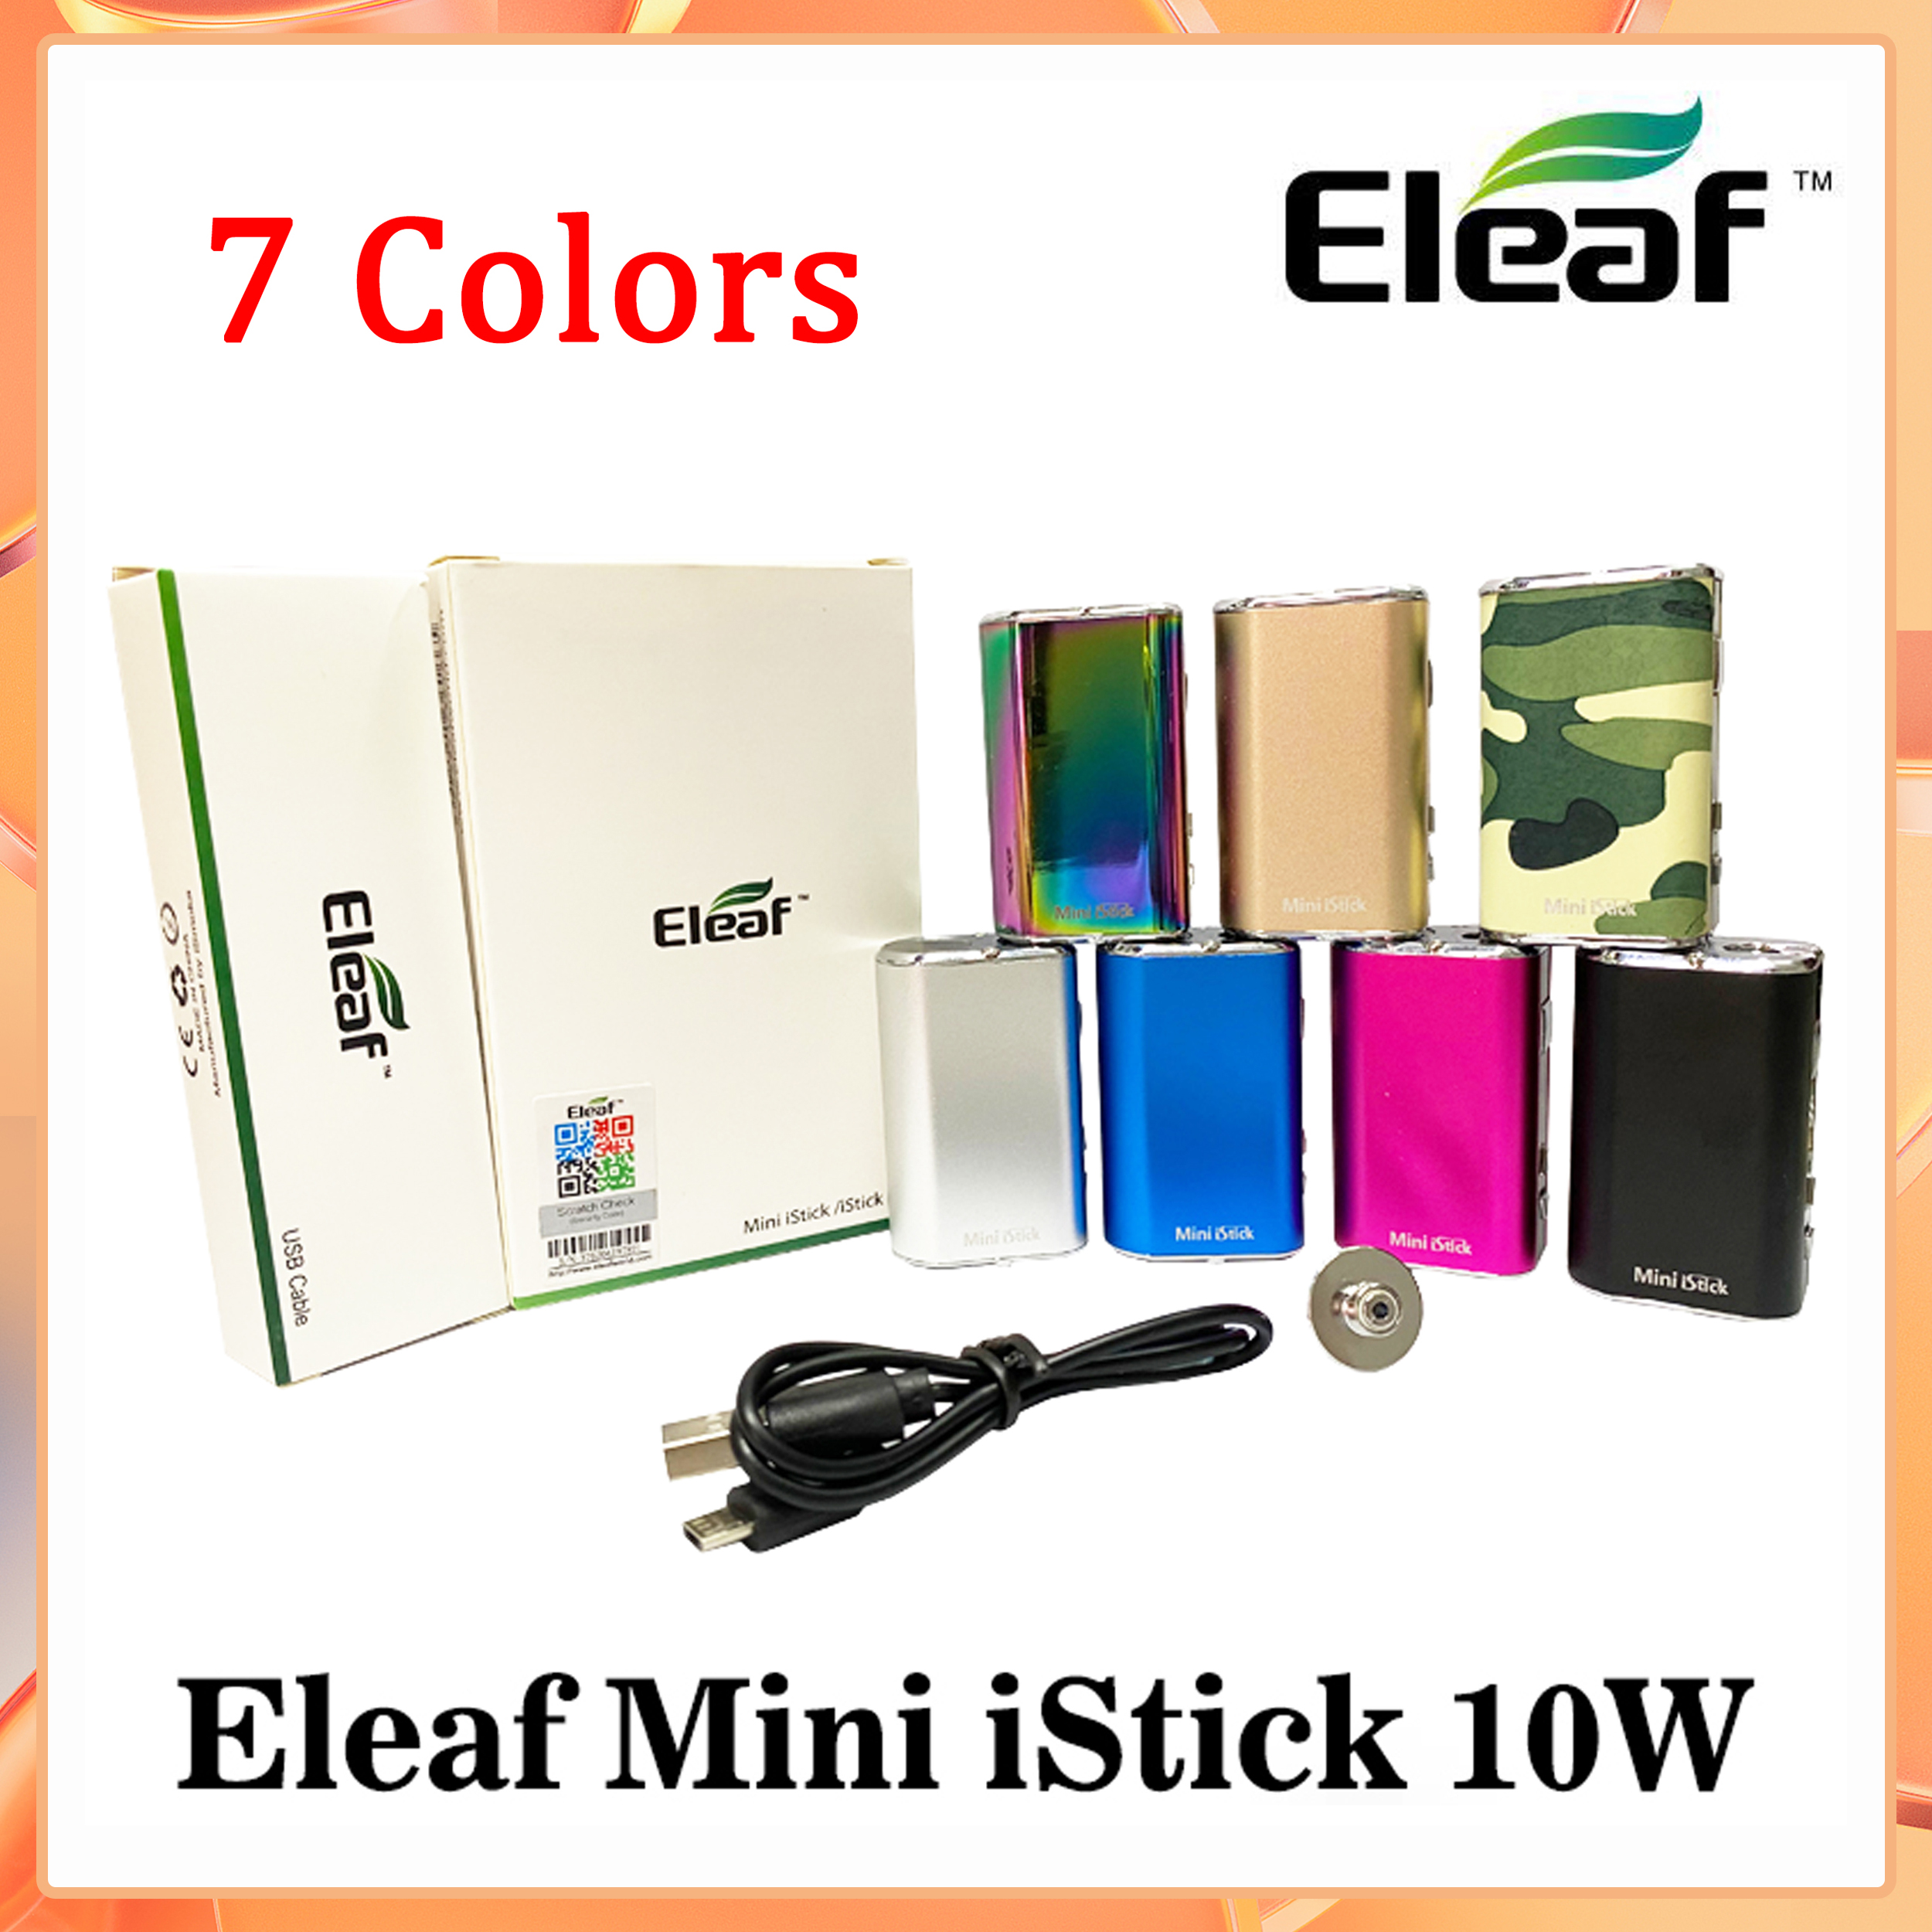 

Eleaf Mini iStick Kit 7 colors 1050mah Built-in Battery 10w Max Output Variable Voltage Mod with USB Cable eGo Connector Fast Send, Oem fee